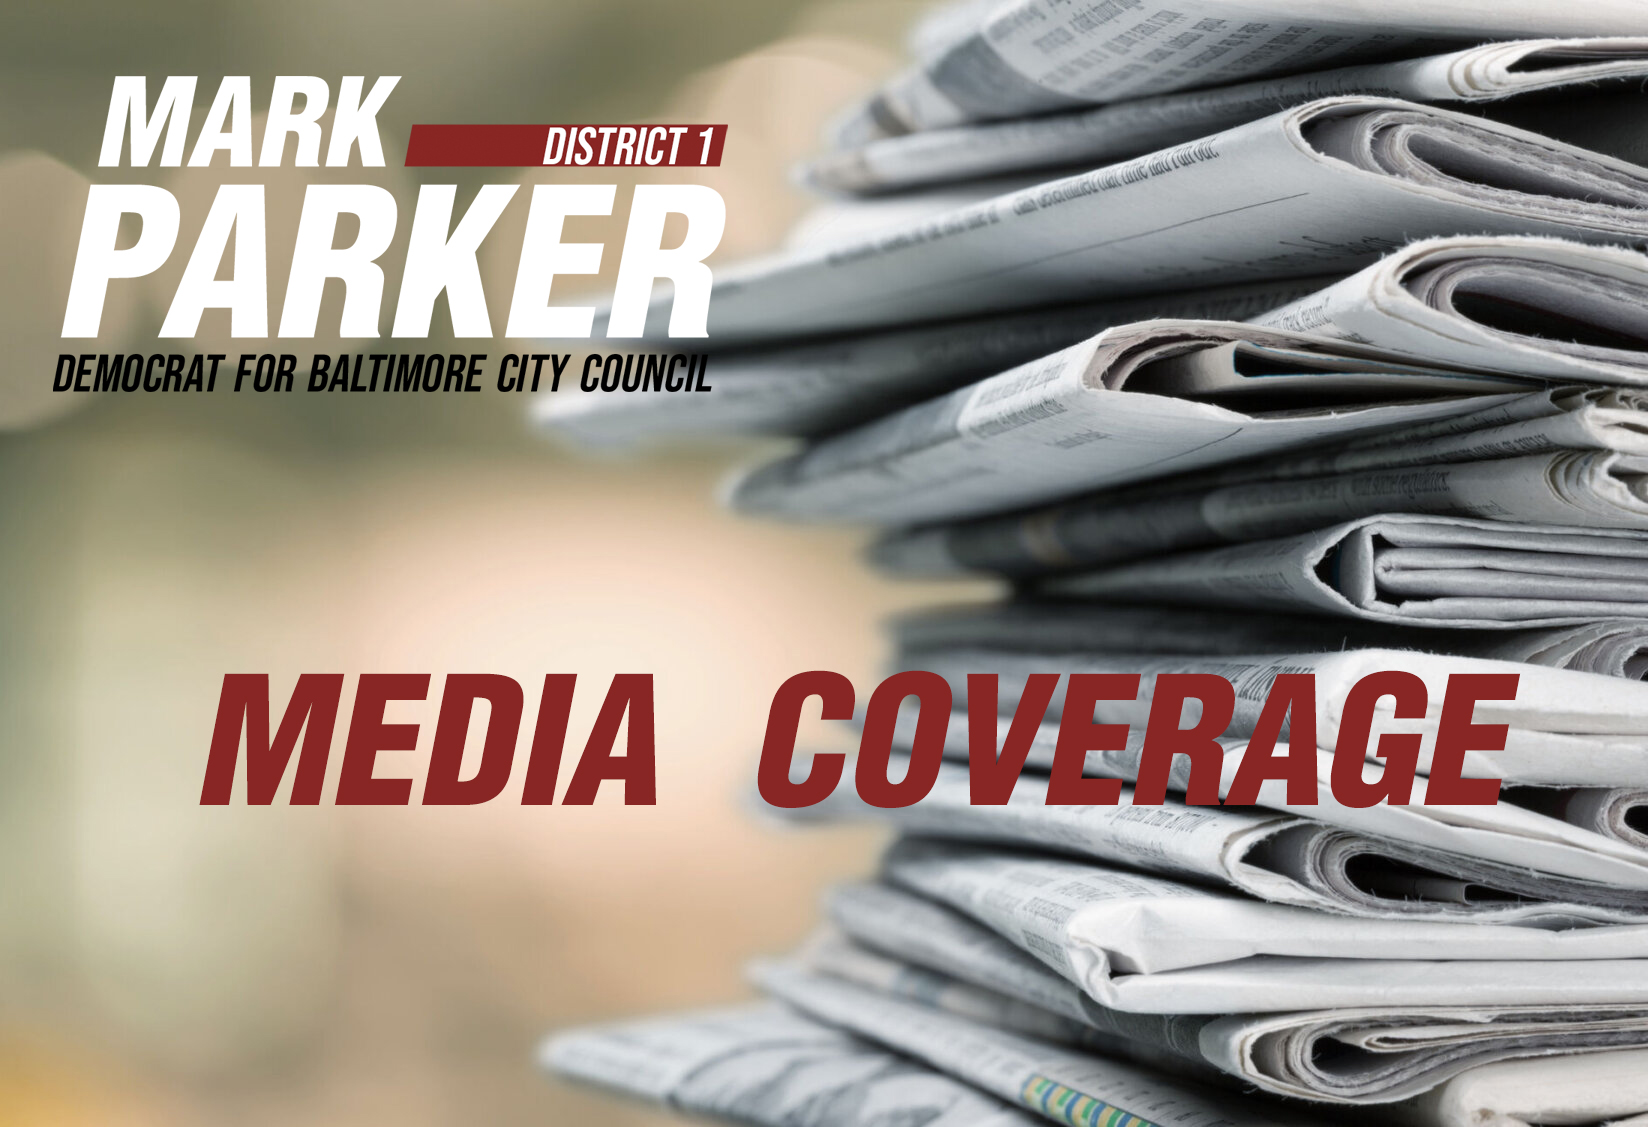 Stack of newspapers with Mark Parker campaign Logo and text "Media Coverage"